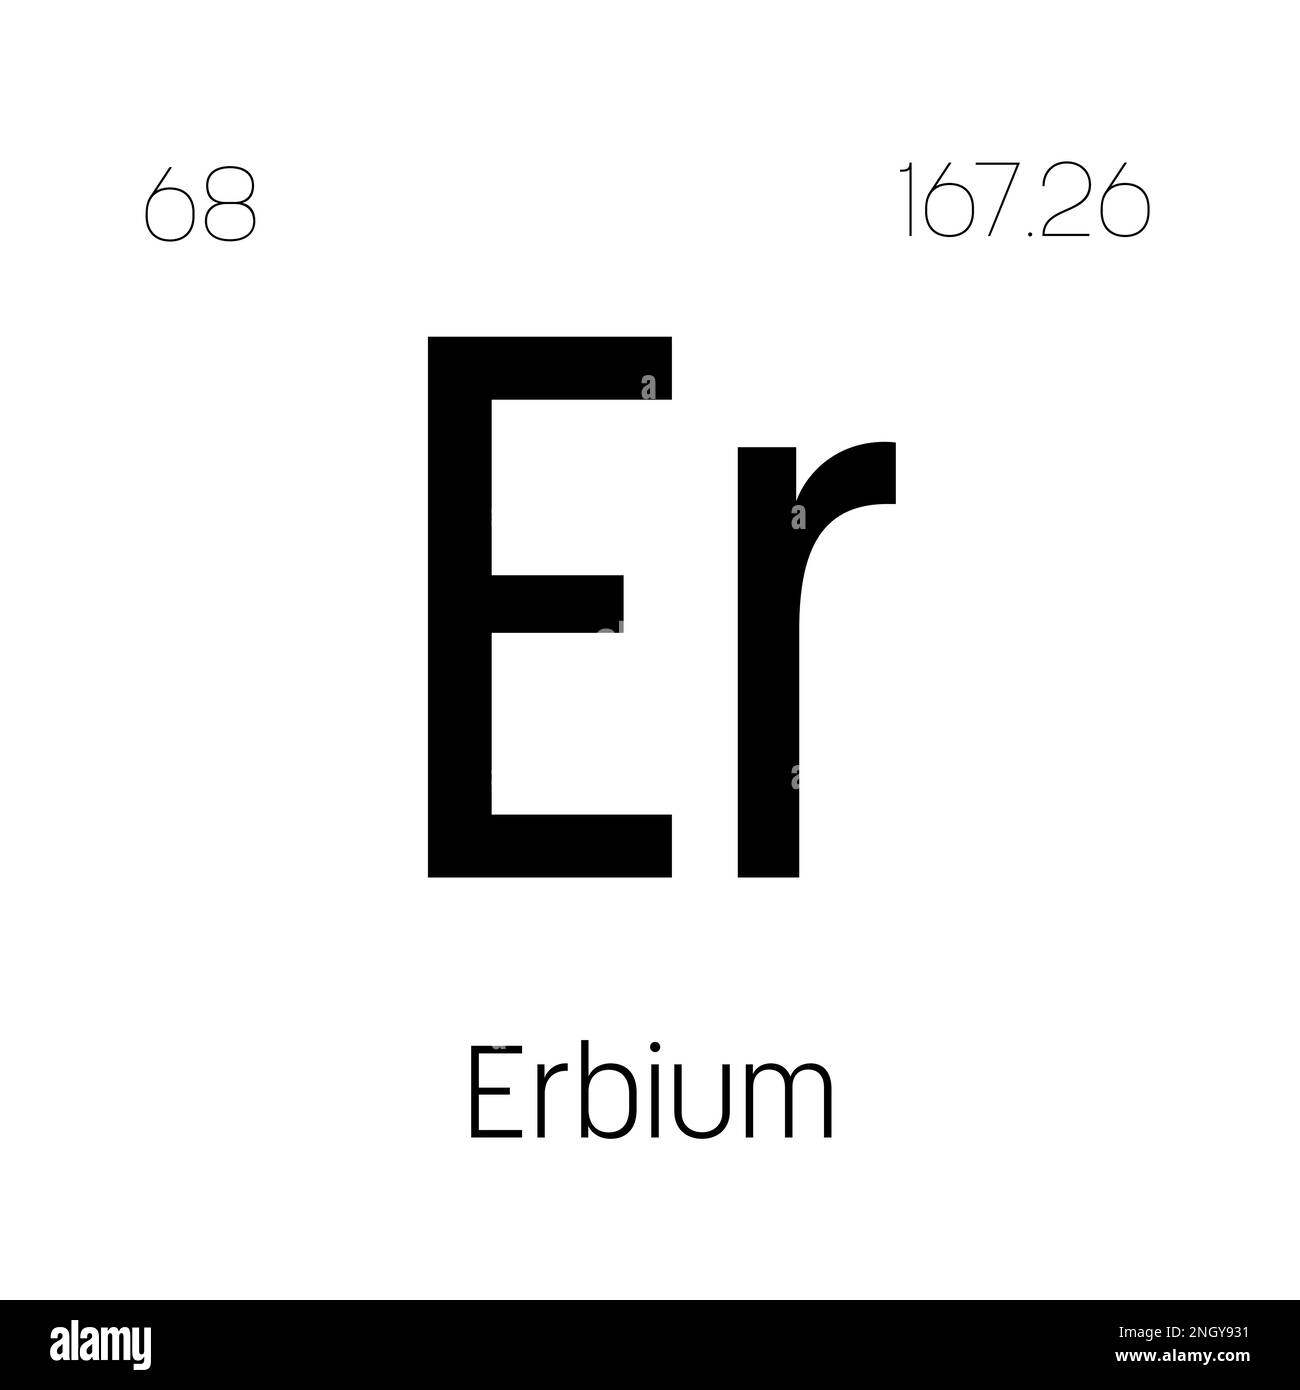 Dysprosium, Dy, periodic table element with name, symbol, atomic number and weight. Rare earth metal with various industrial uses, such as in magnets, lighting, and as a neutron absorber in nuclear reactors. Stock Vector